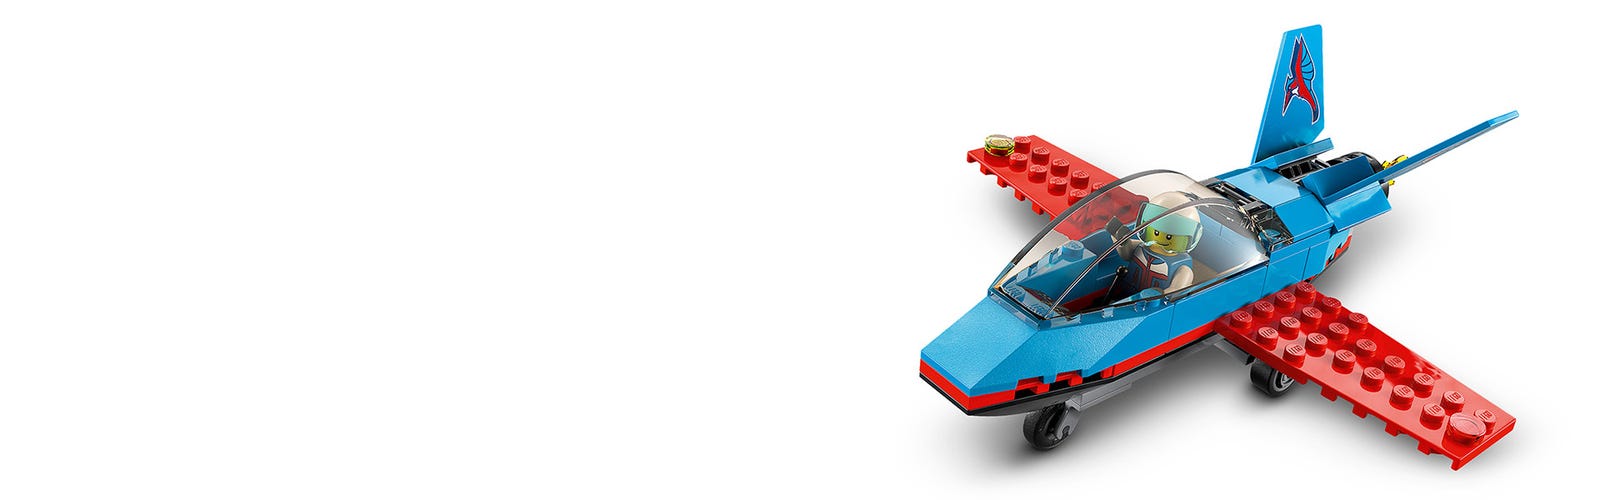 Stunt Buy Plane the | City online LEGO® US Official Shop 60323 at |